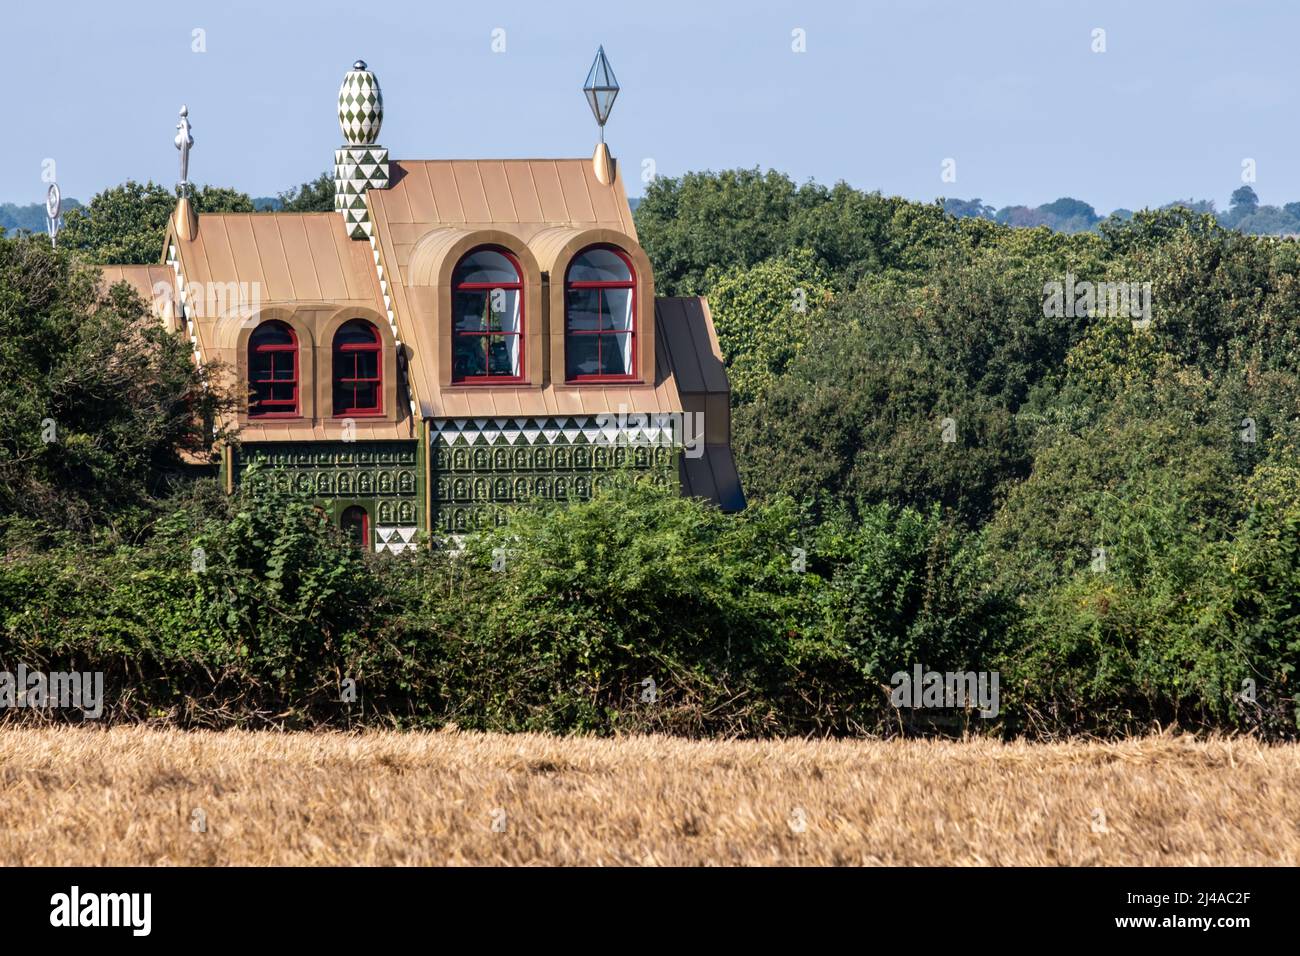 A view of the House for Essex by artist Grayson Perry in Wrabness. Stock Photo